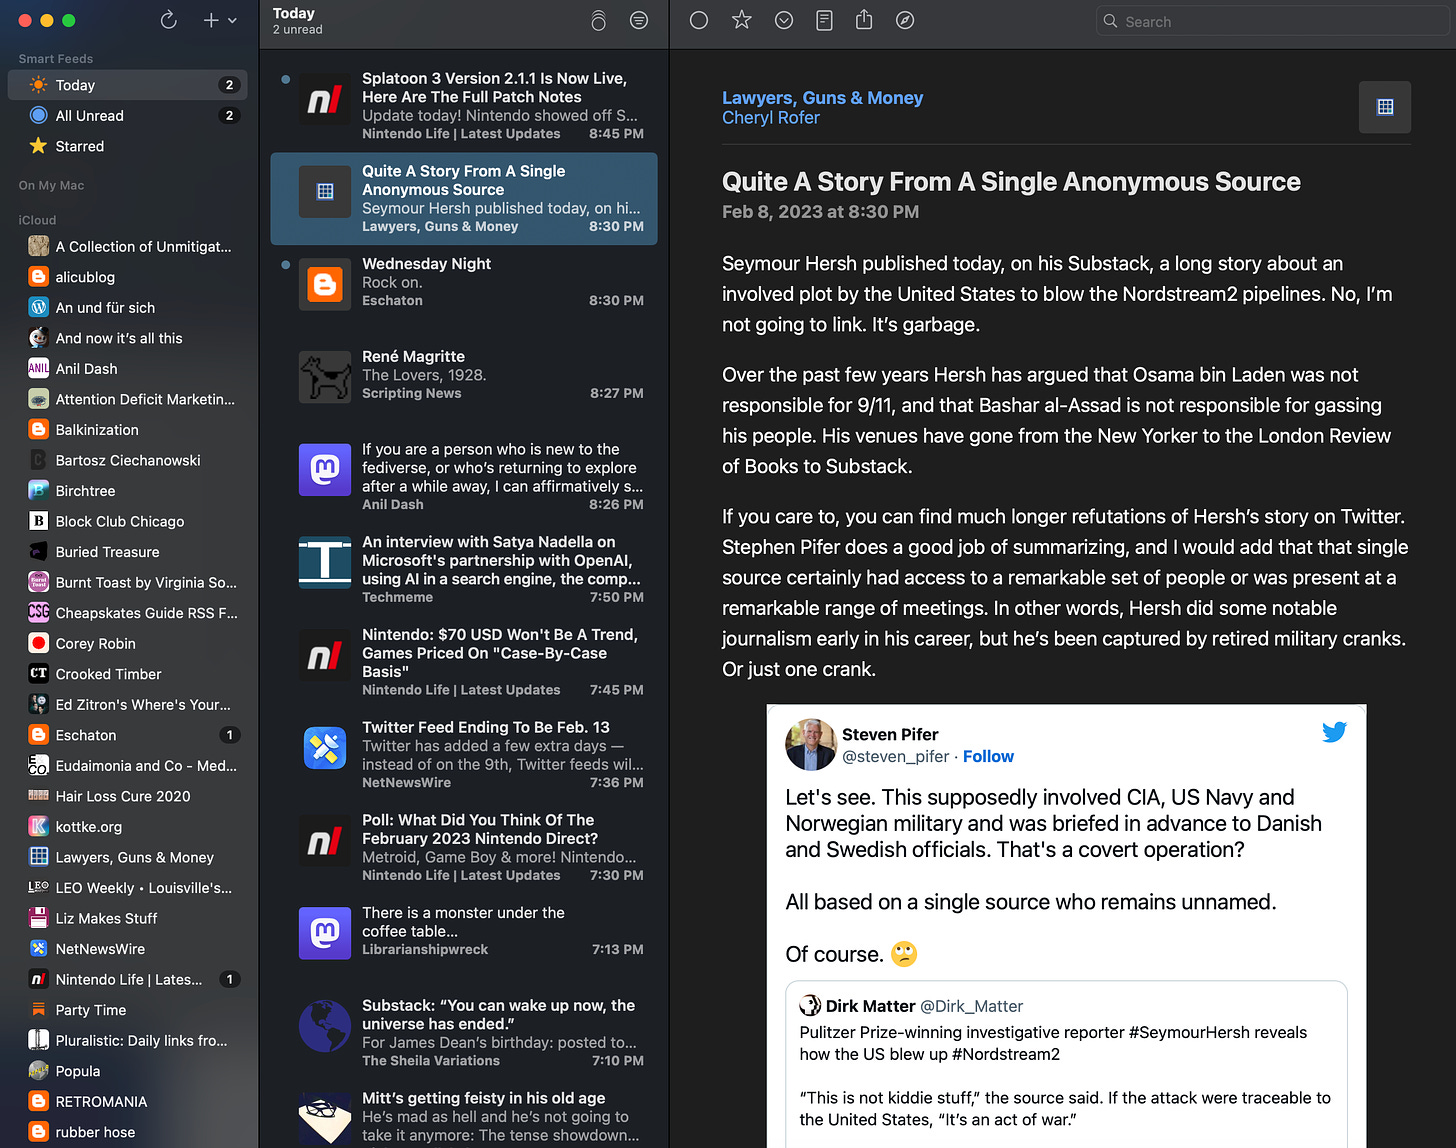 A screenshot of the macOS application NetNewsWire, showing RSS feeds.